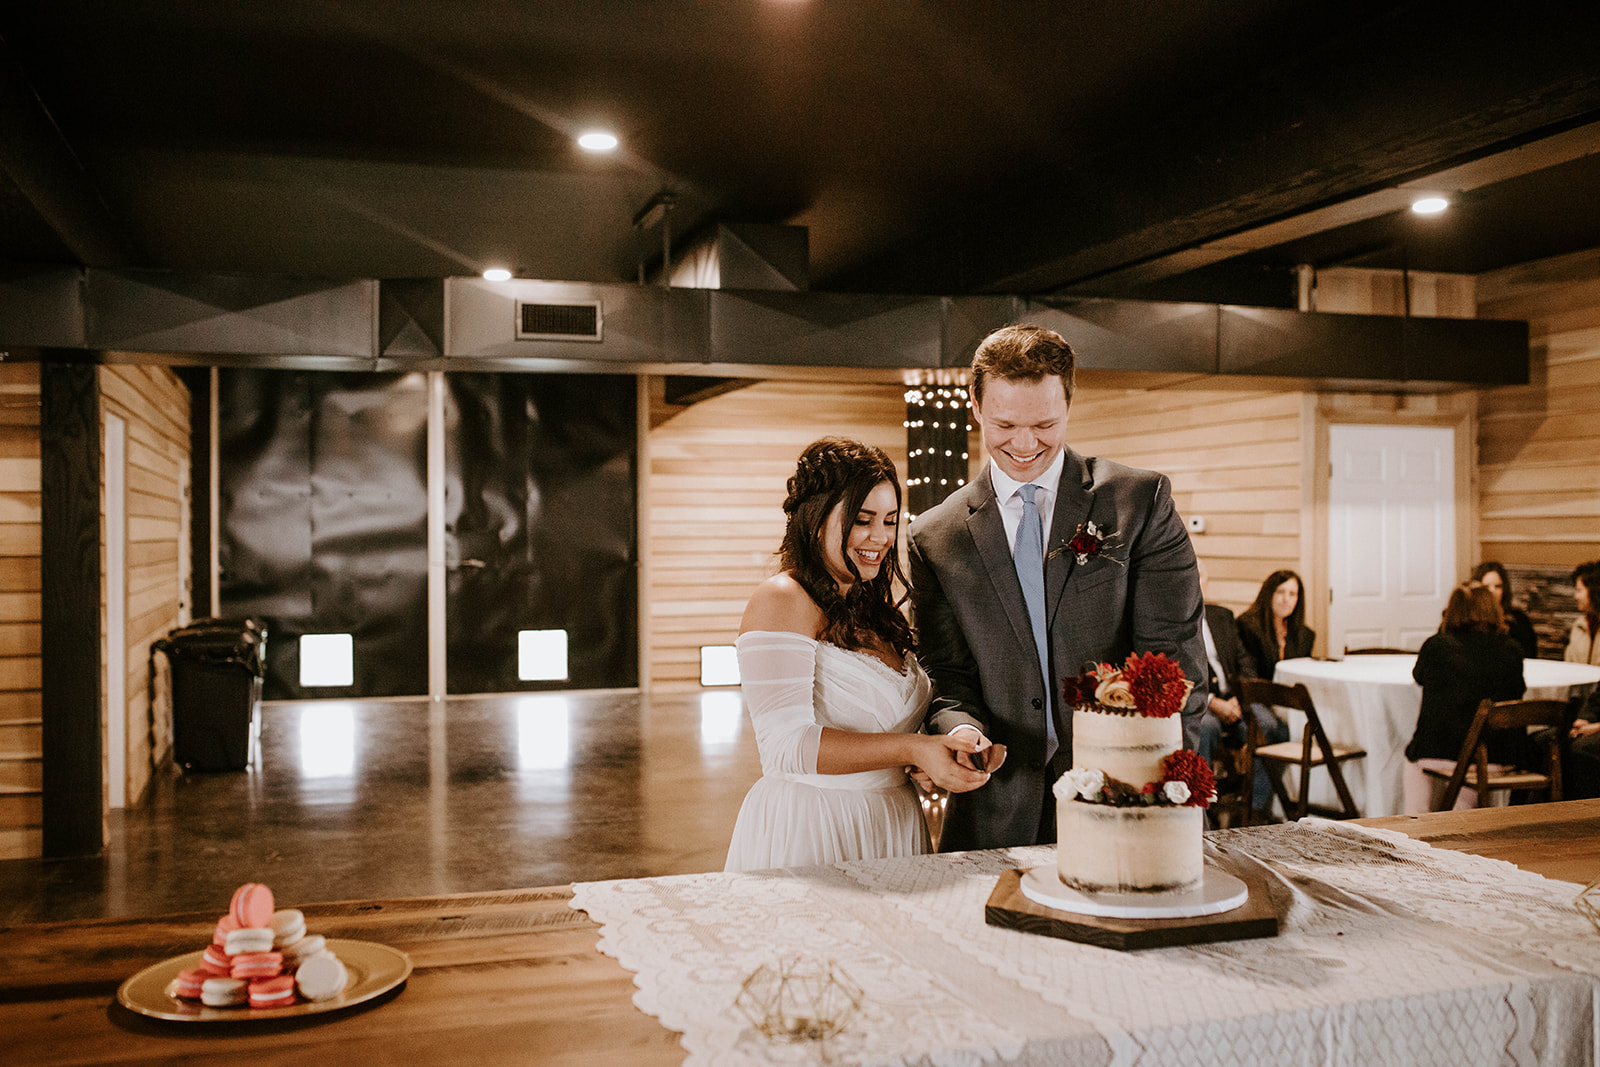 Surprise Vow Renewal by Tara Winstead Photography featured on Nashville Bride Guide